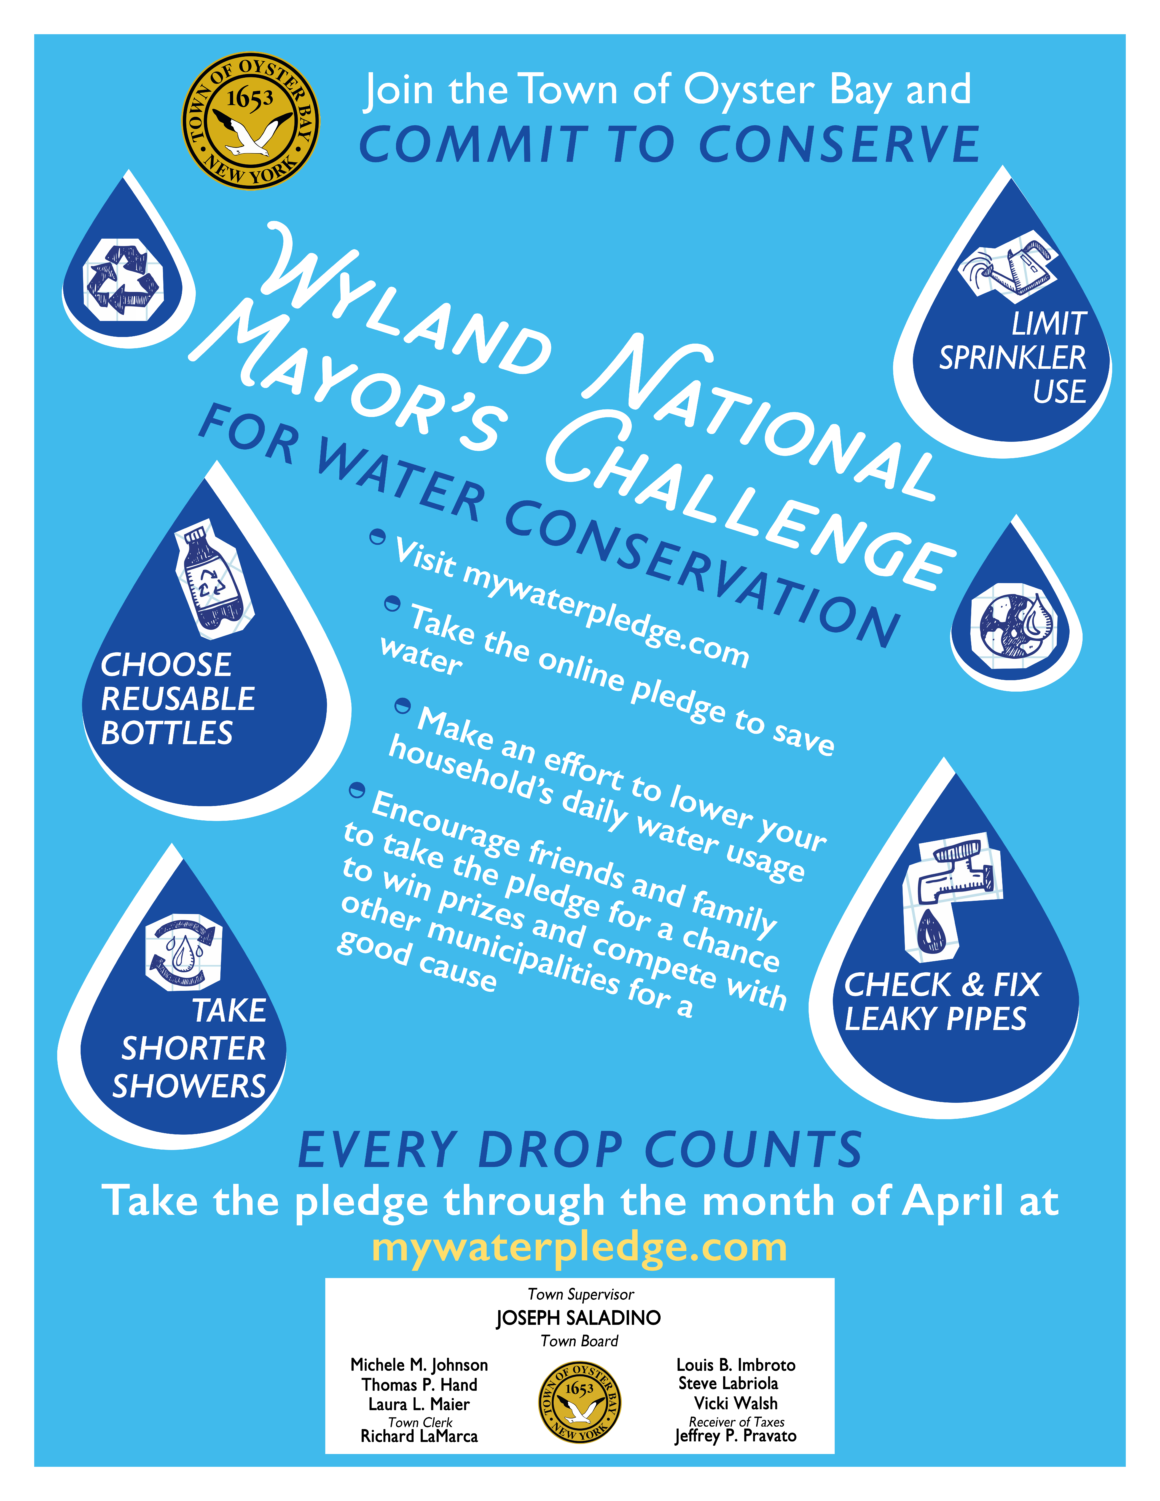 Town Invites Residents to ‘Commit to Conserve’ in Wyland Water Conservation Challenge